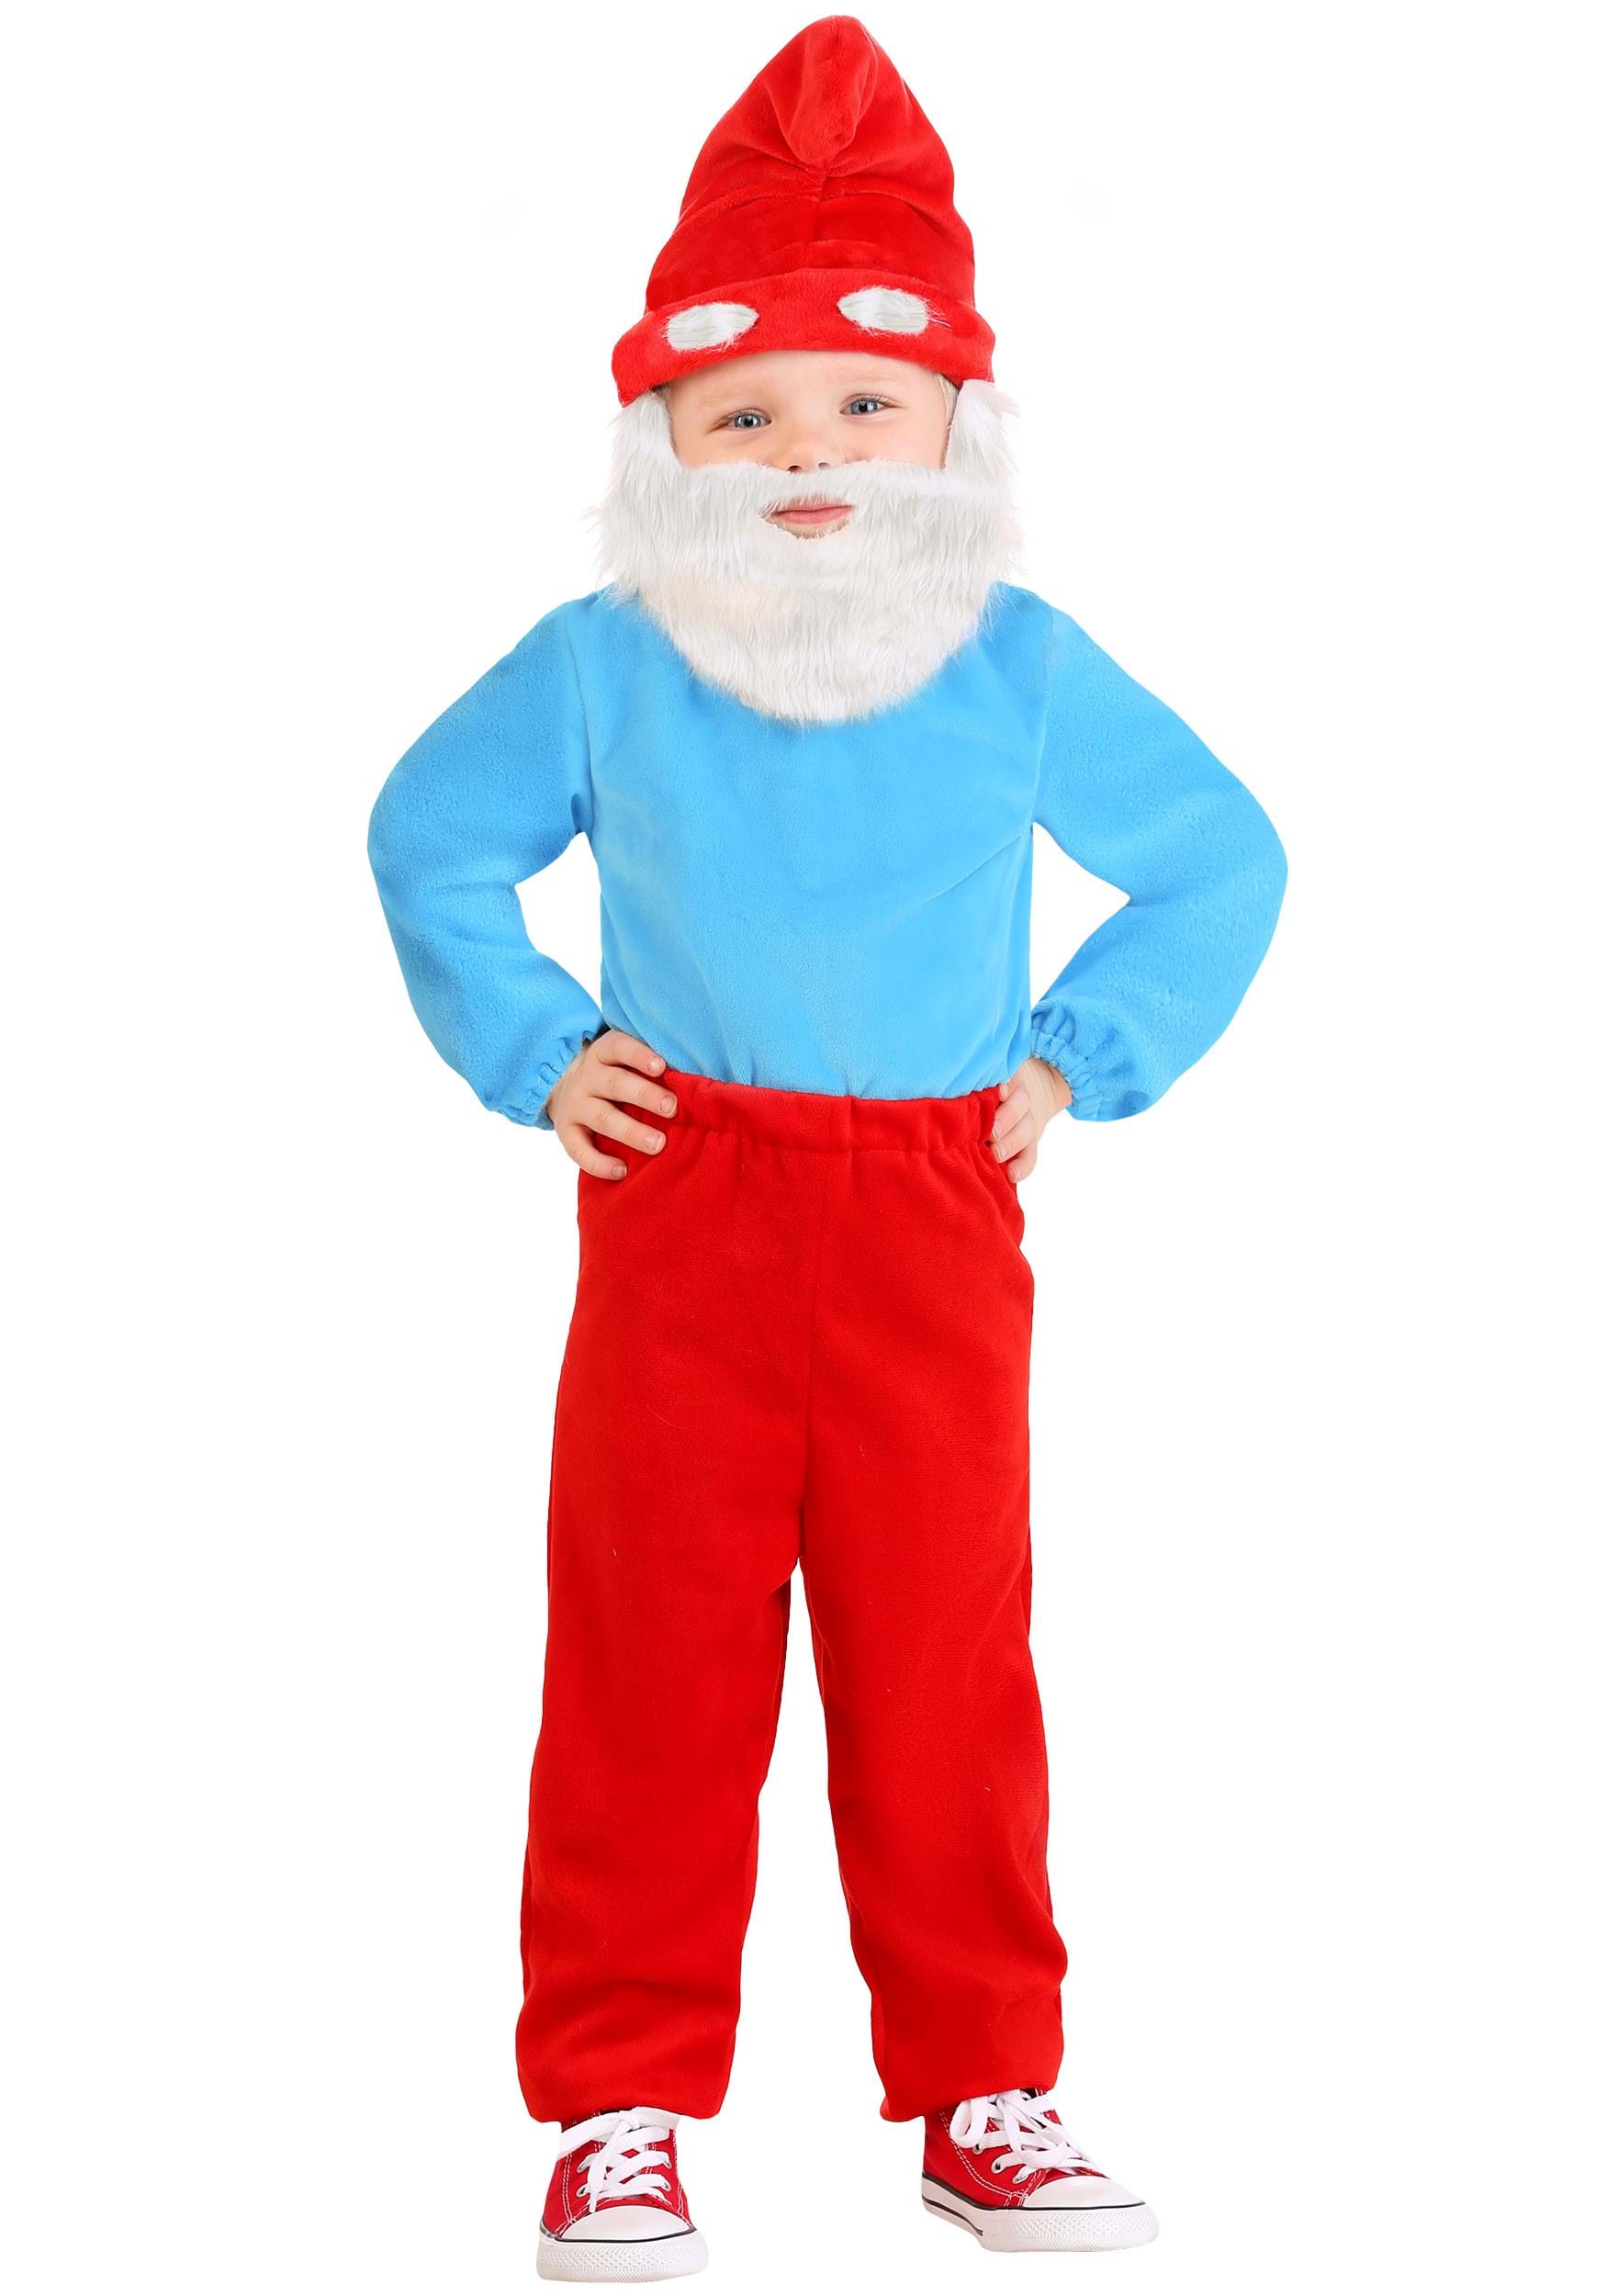 Photos - Fancy Dress Toddler FUN Costumes  Papa Smurf The Smurfs Costume Blue/Red/White 